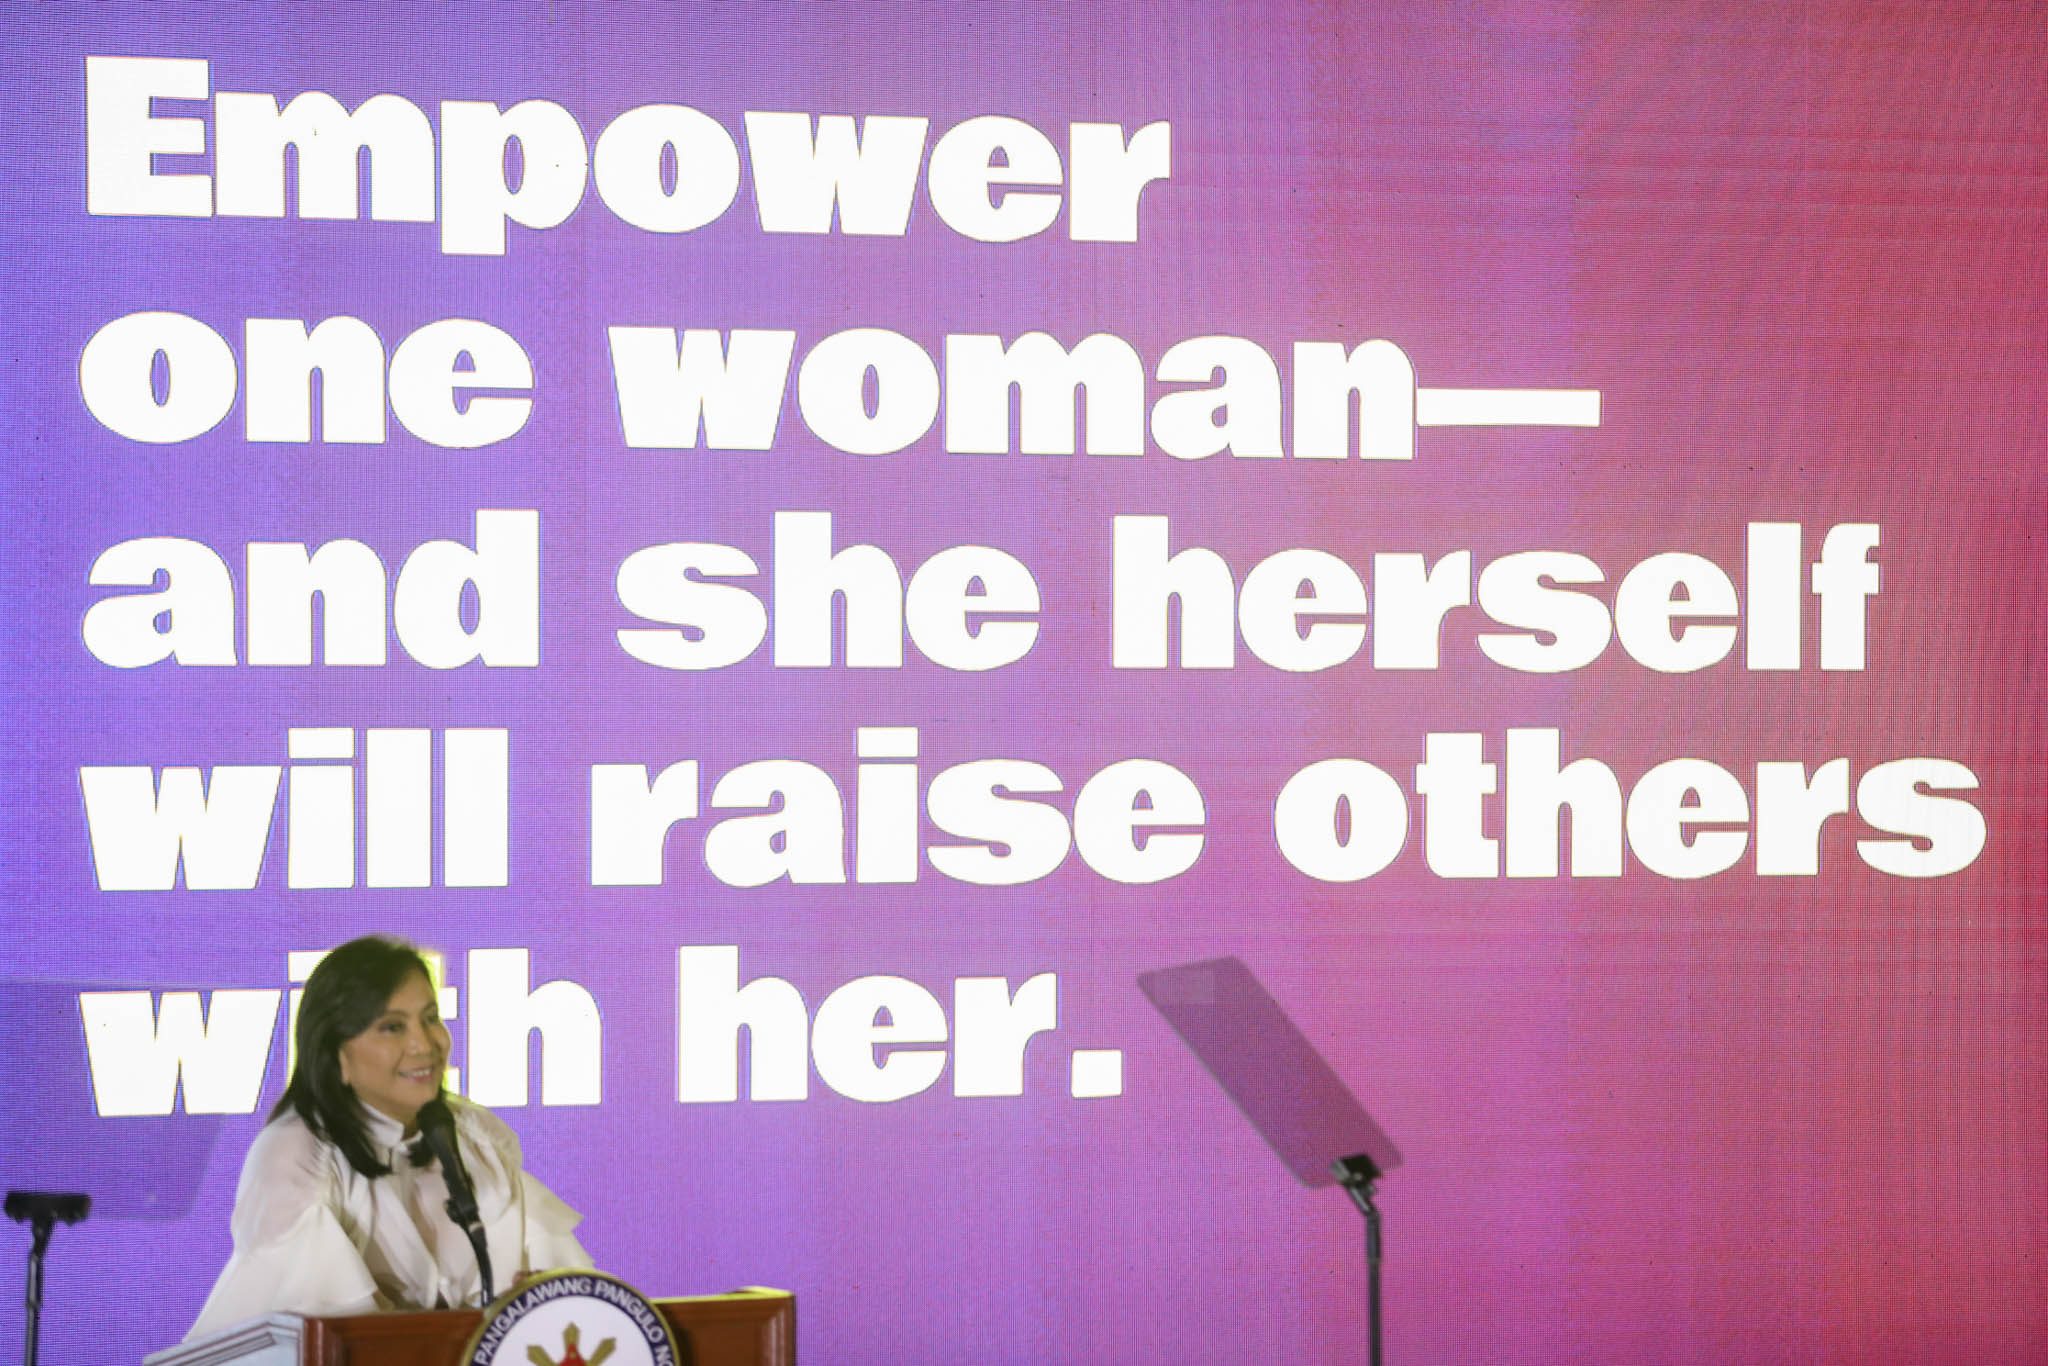 Robredo: ‘Empower one woman and she will raise others with her’